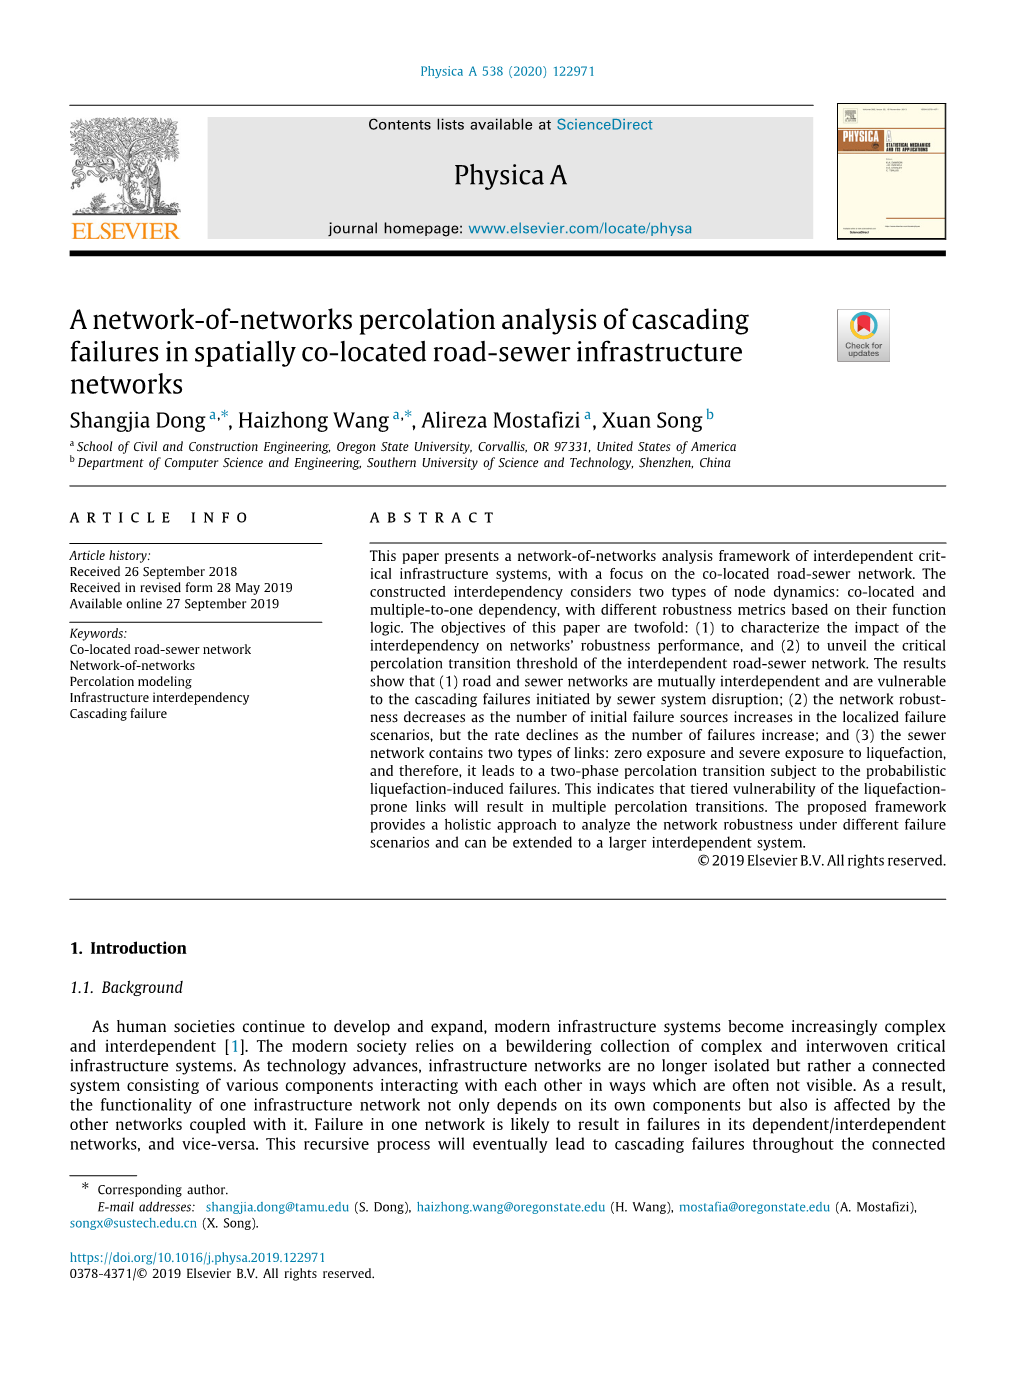 A Network-Of-Networks Percolation Analysis of Cascading Failures in Spatially Co-Located Road-Sewer Infrastructure Networks